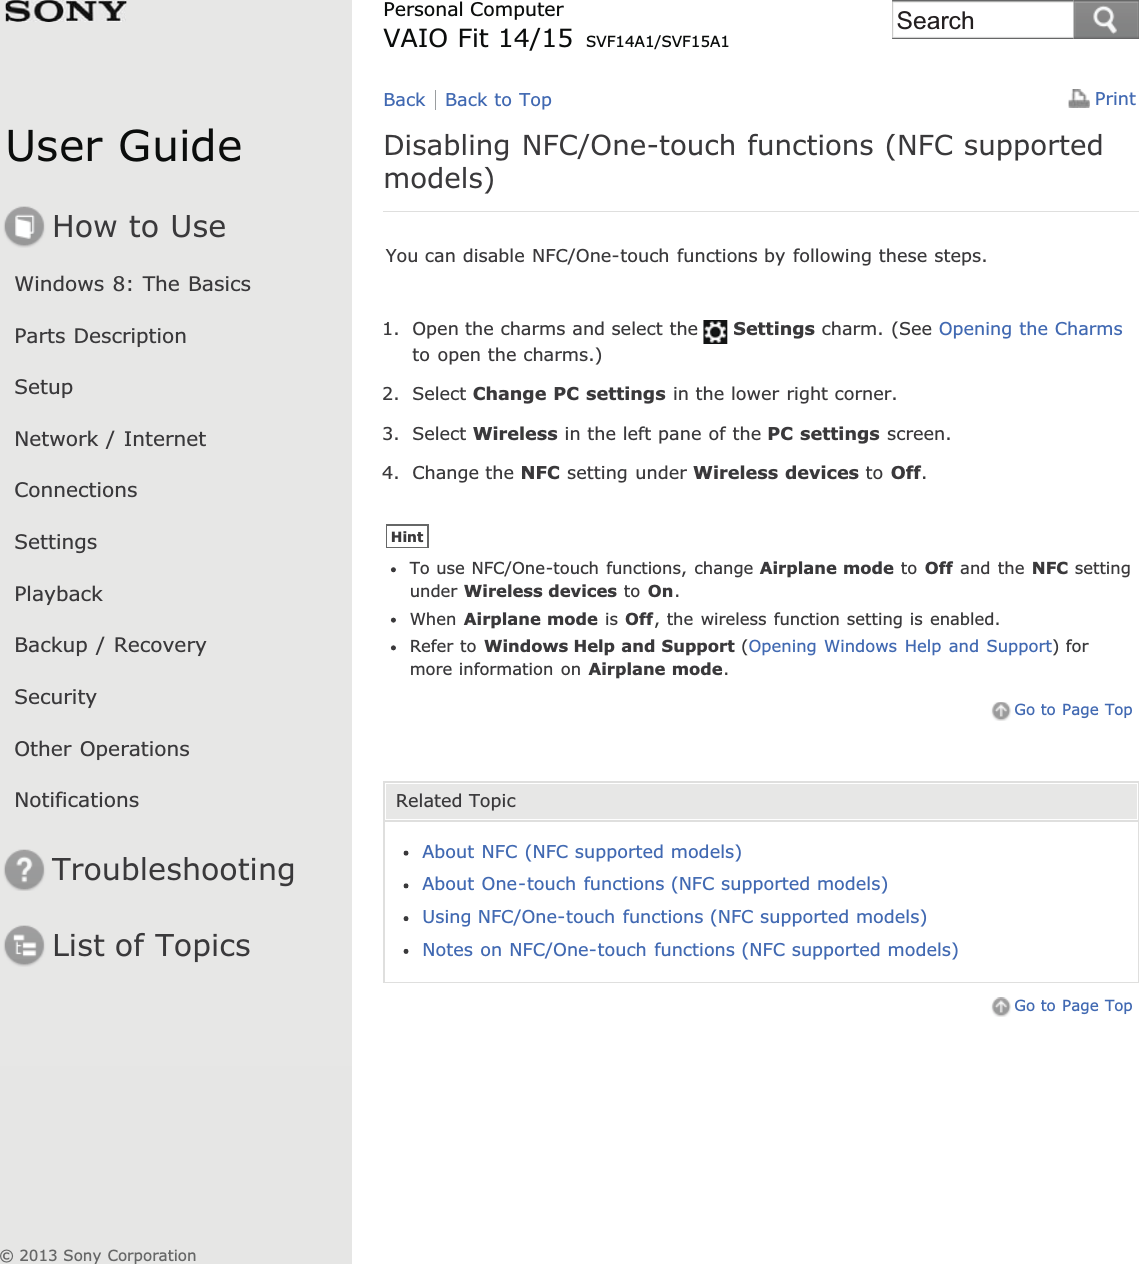 User GuideHow to UseWindows 8: The BasicsParts DescriptionSetupNetwork / InternetConnectionsSettingsPlaybackBackup / RecoverySecurityOther OperationsNotificationsTroubleshootingList of TopicsPrintPersonal ComputerVAIO Fit 14/15 SVF14A1/SVF15A1Disabling NFC/One-touch functions (NFC supportedmodels)You can disable NFC/One-touch functions by following these steps.1. Open the charms and select the Settings charm. (See Opening the Charmsto open the charms.)2. Select Change PC settings in the lower right corner.3. Select Wireless in the left pane of the PC settings screen.4. Change the NFC setting under Wireless devices to Off.HintTo use NFC/One-touch functions, change Airplane mode to Off and the NFC settingunder Wireless devices to On.When Airplane mode is Off, the wireless function setting is enabled.Refer to Windows Help and Support (Opening Windows Help and Support) formore information on Airplane mode.Go to Page TopRelated TopicAbout NFC (NFC supported models)About One-touch functions (NFC supported models)Using NFC/One-touch functions (NFC supported models)Notes on NFC/One-touch functions (NFC supported models)Go to Page TopBack Back to Top© 2013 Sony CorporationSearch